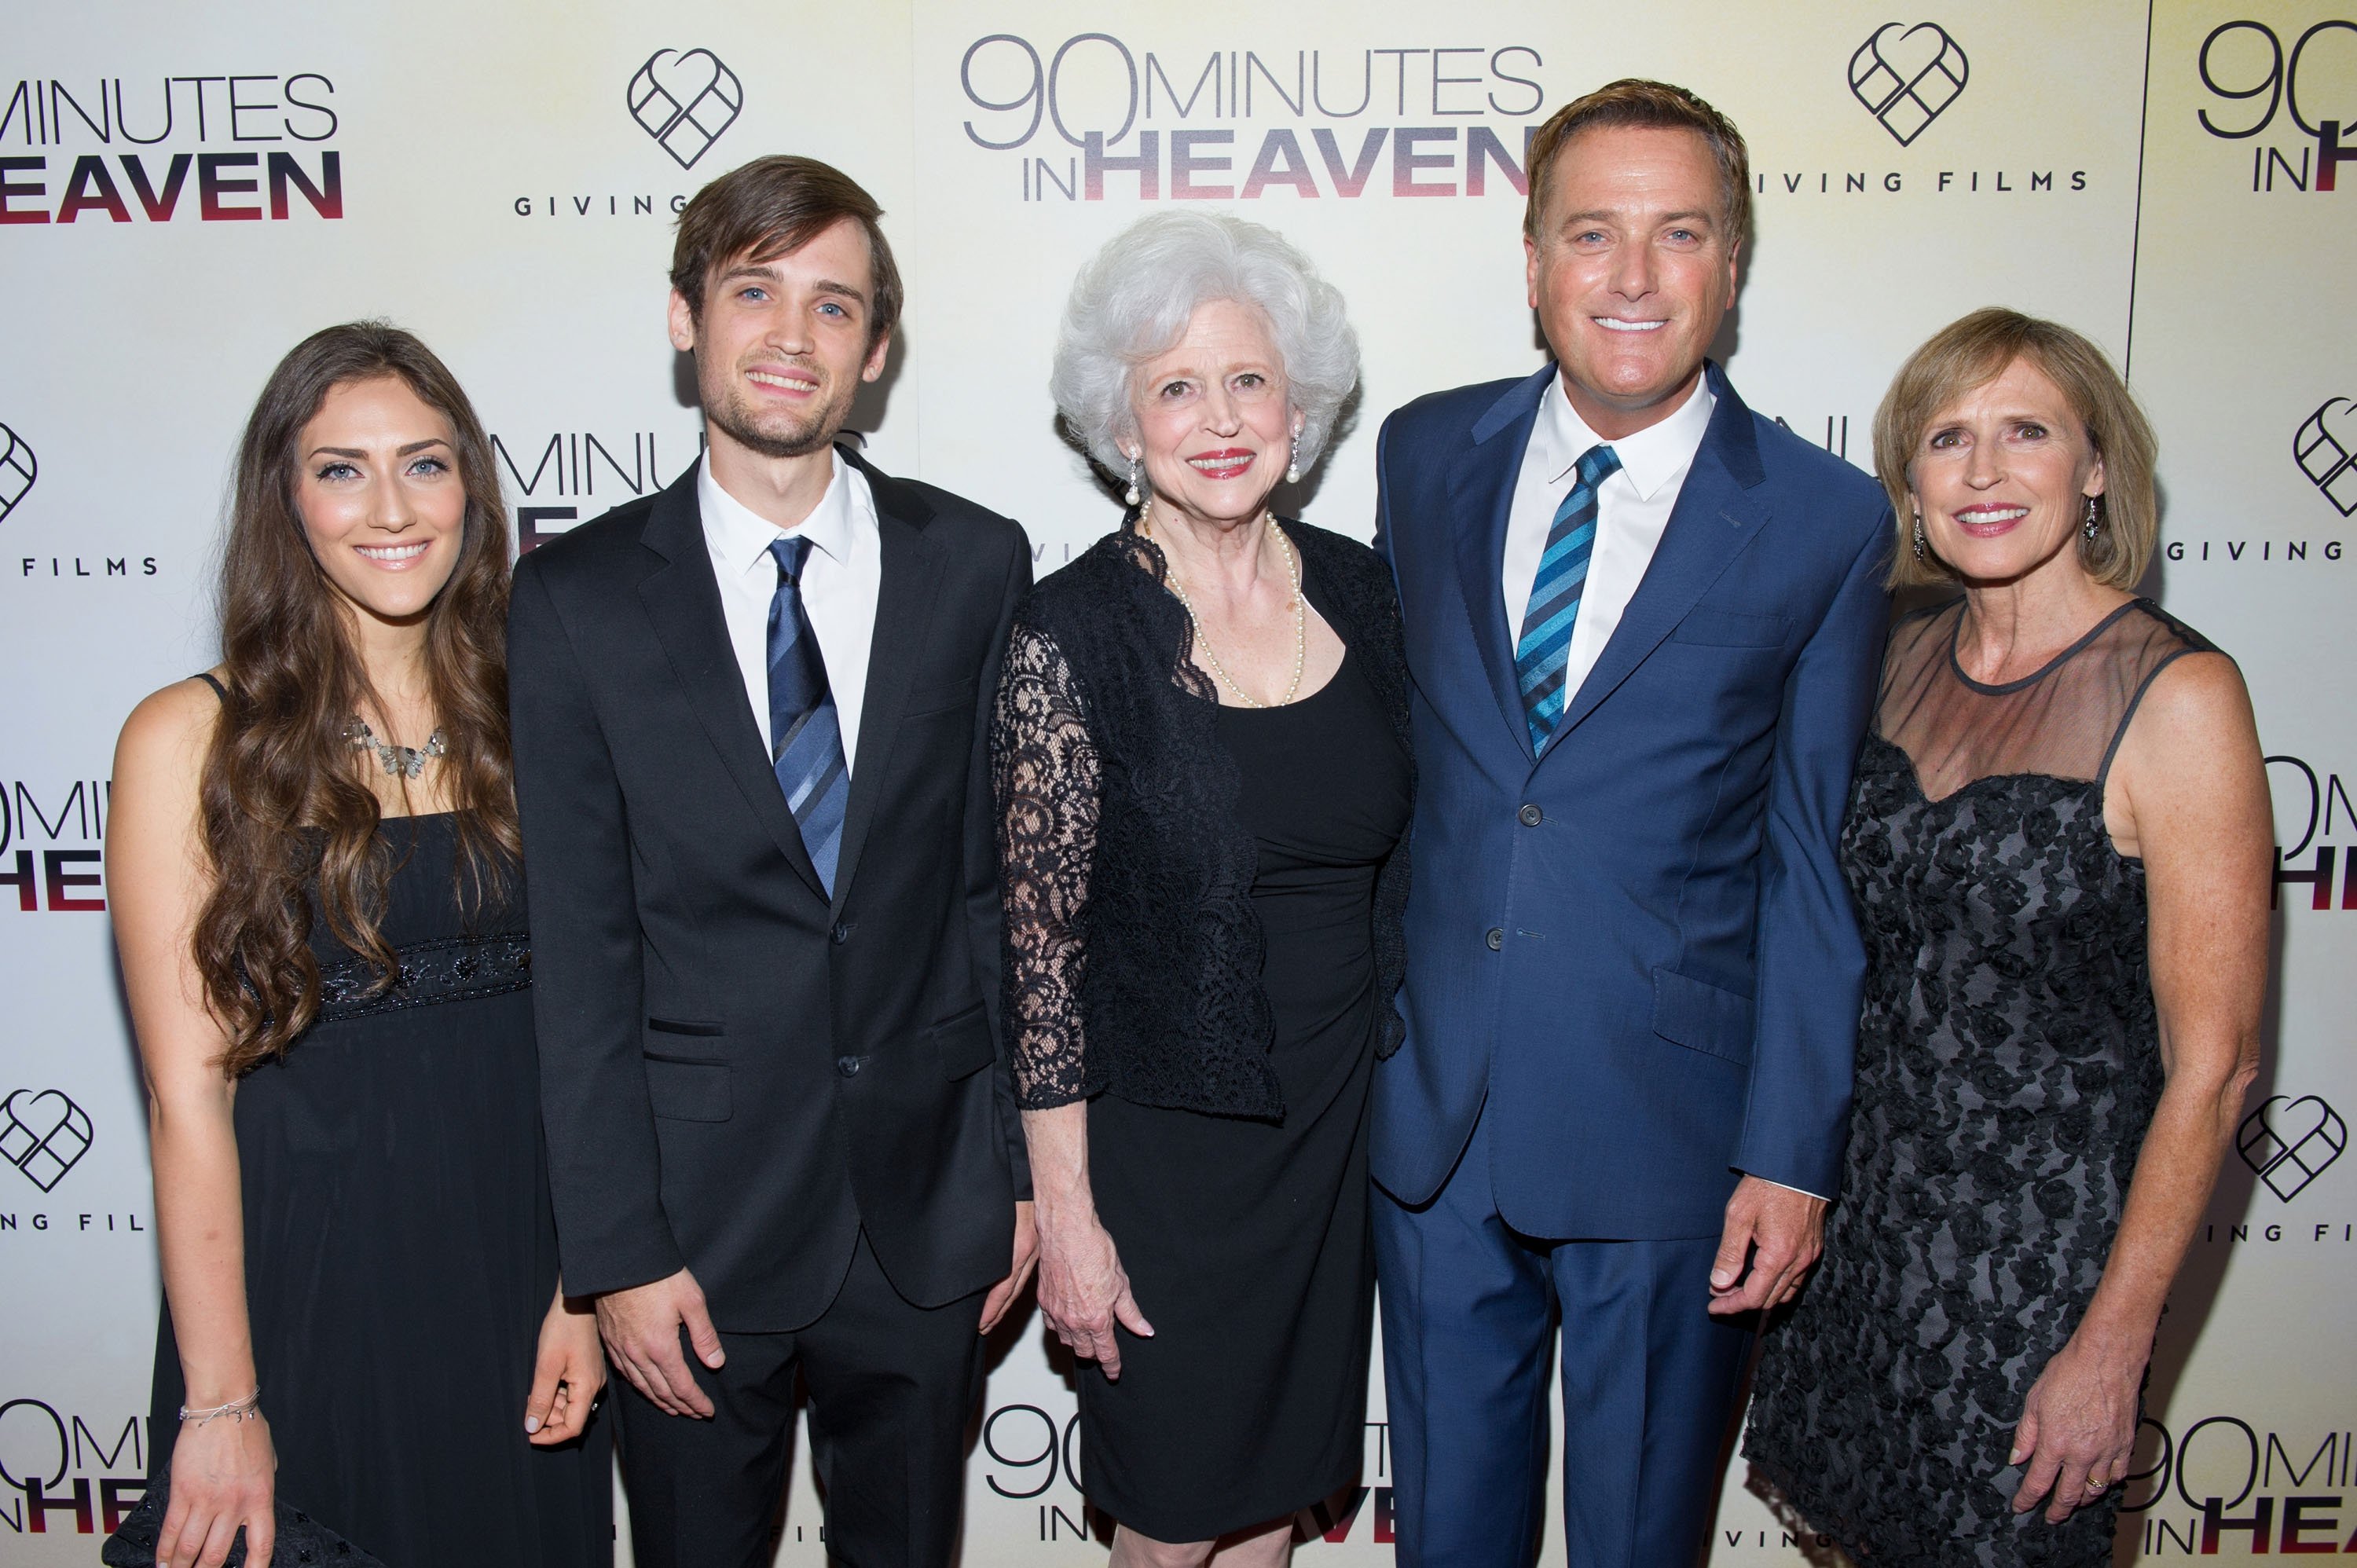 Tyler Smith, Michael W. Smith and family are photographed as they attend the '90 Minutes In Heaven' Atlanta premiere at Fox Theater on September 1, 2015, in Atlanta | Source: Getty Images